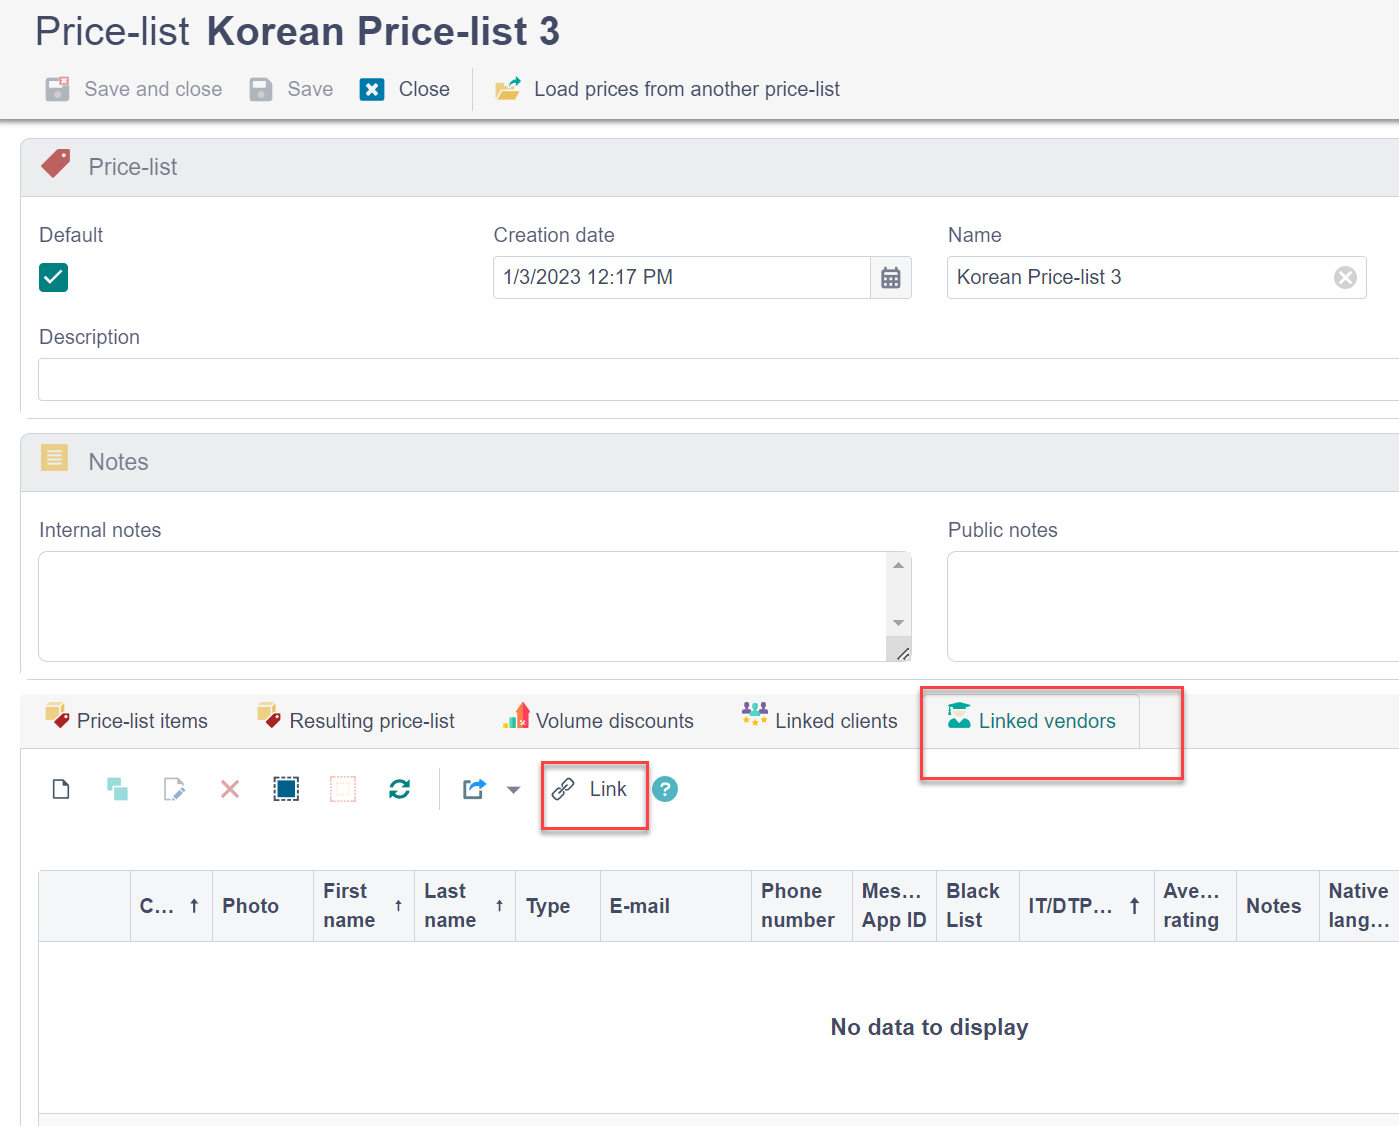 Trados Studio screenshot showing the 'Price-list Korean Price-list 3' interface with a red box highlighting the 'Linked vendors' tab indicating a possible error location.